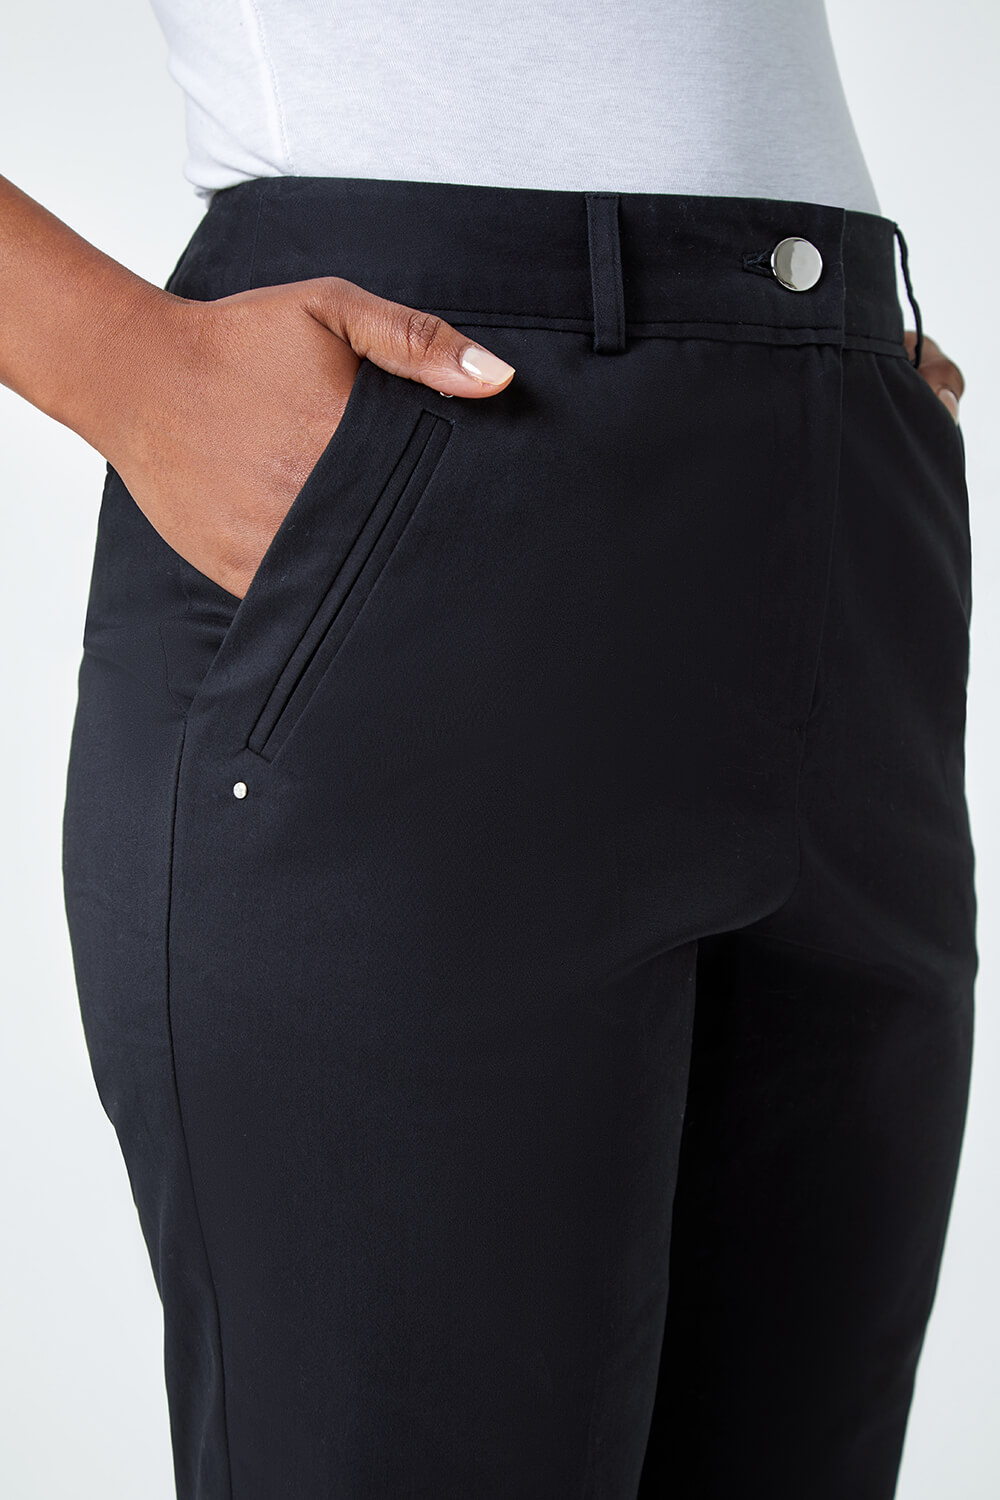 Black Petite Cotton Blend Stretch Trousers, Image 5 of 5